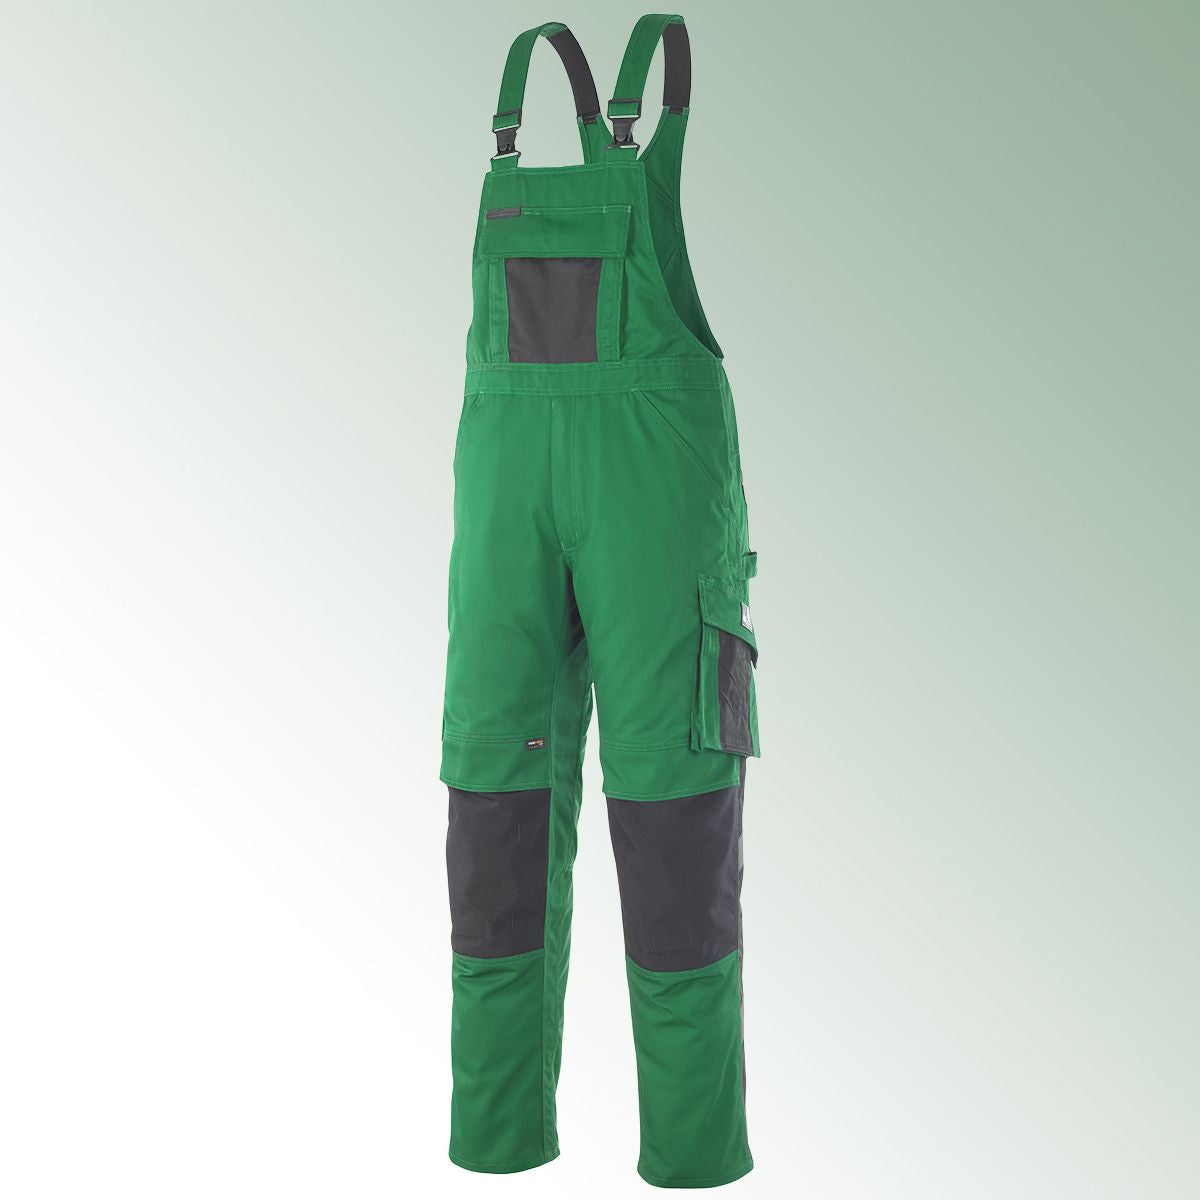 Dungarees Augsburg Size 60 Green / Black